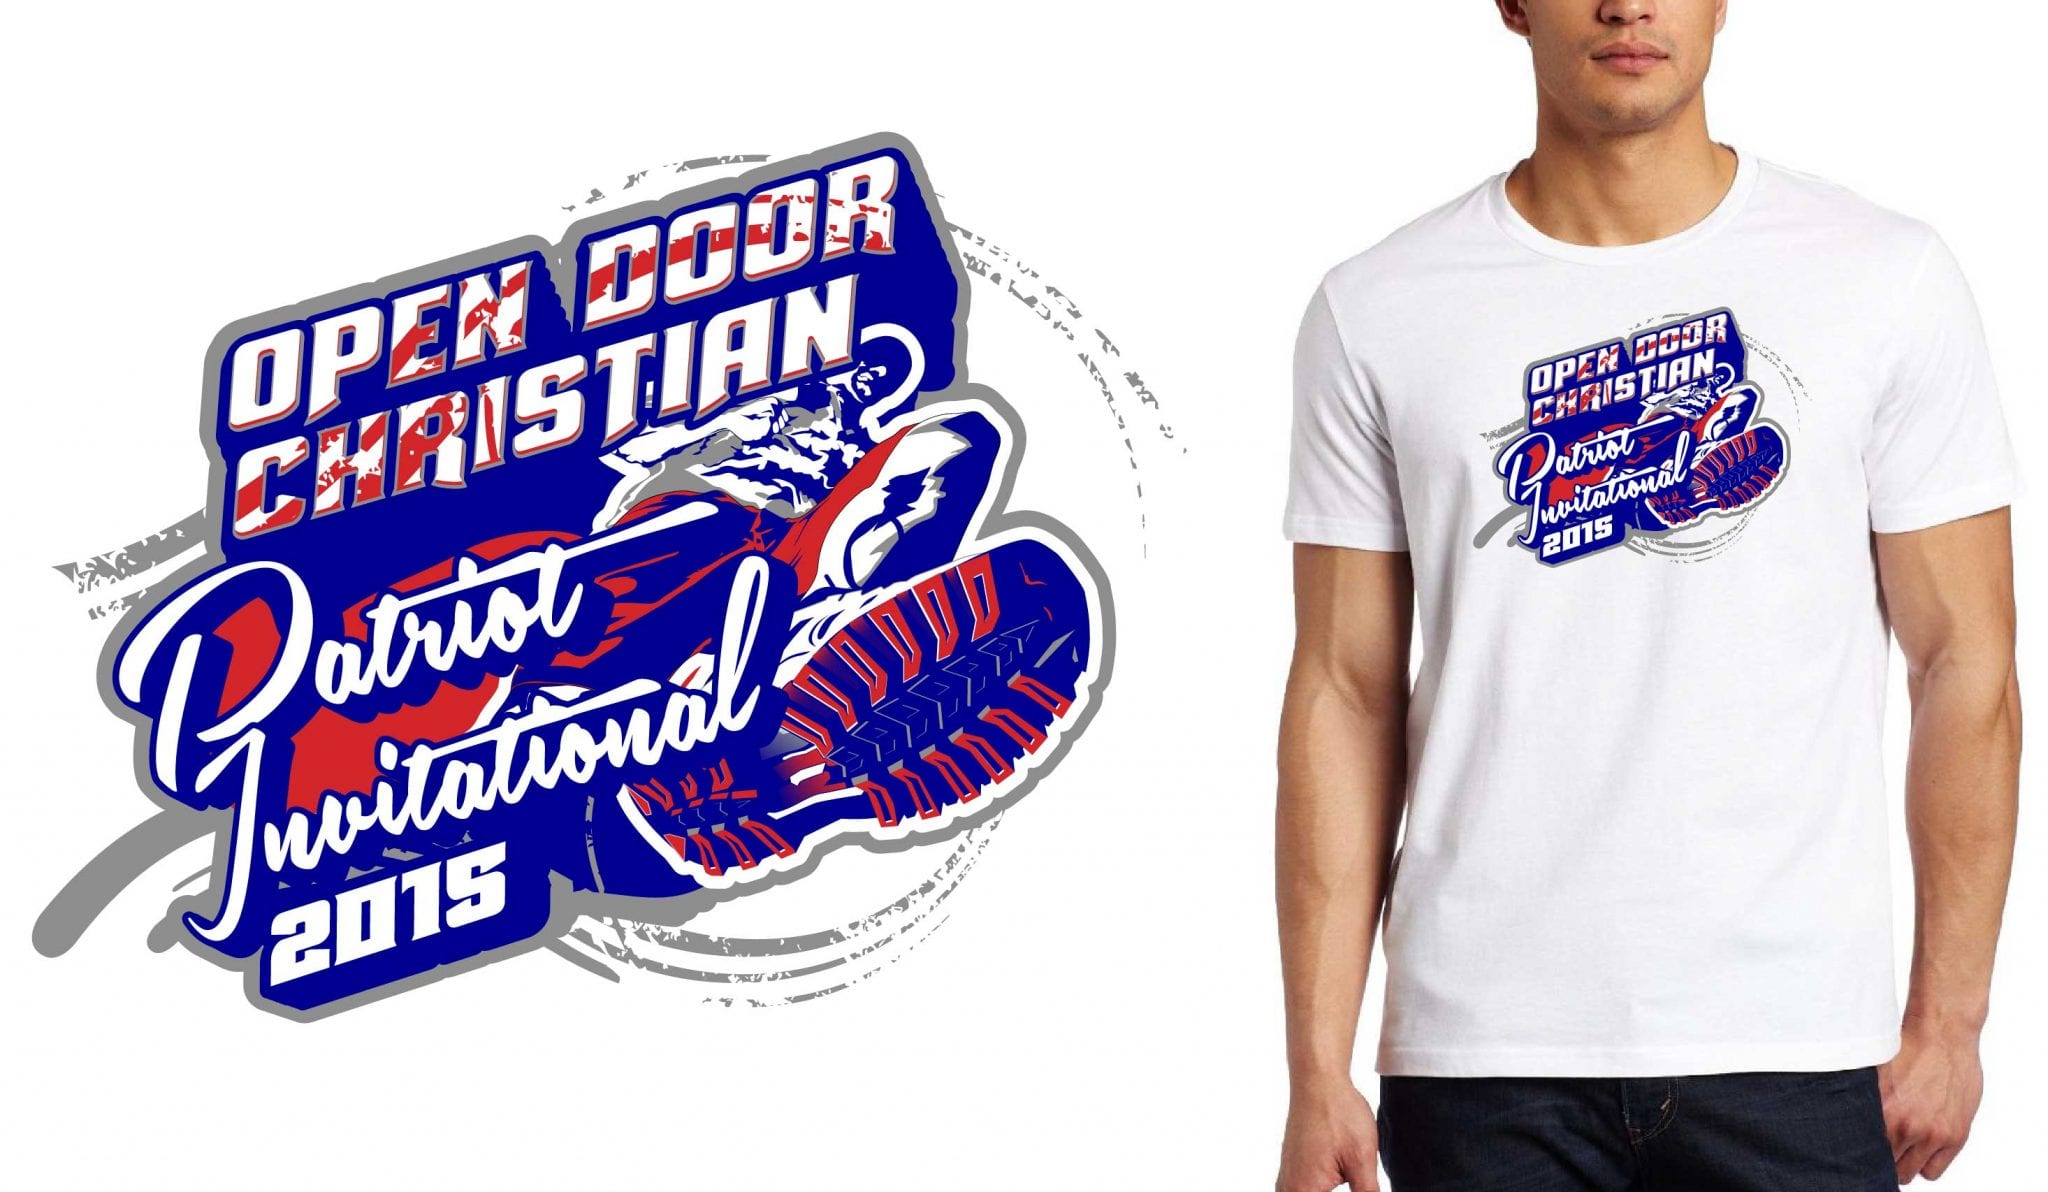 Open Door Christian 28th Annual Invitational track and field cool tshirt logo design